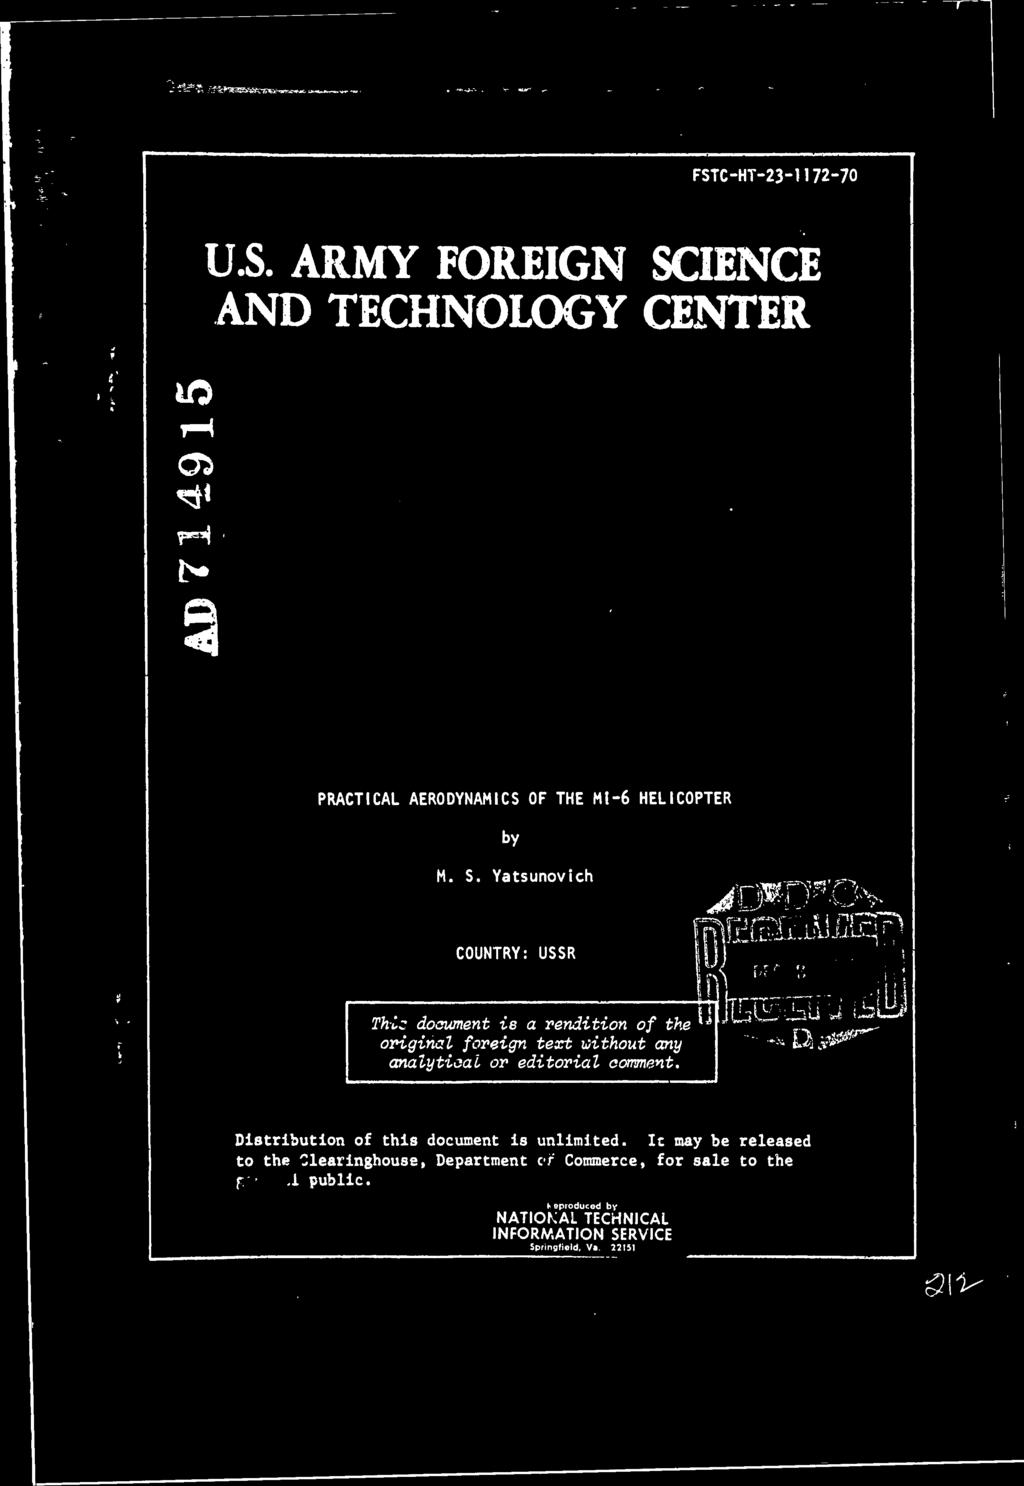 Yatsunovich COUNTRY: USSR T^fcC document is a rendition of the original foreign text without any analytical or editorial comment.